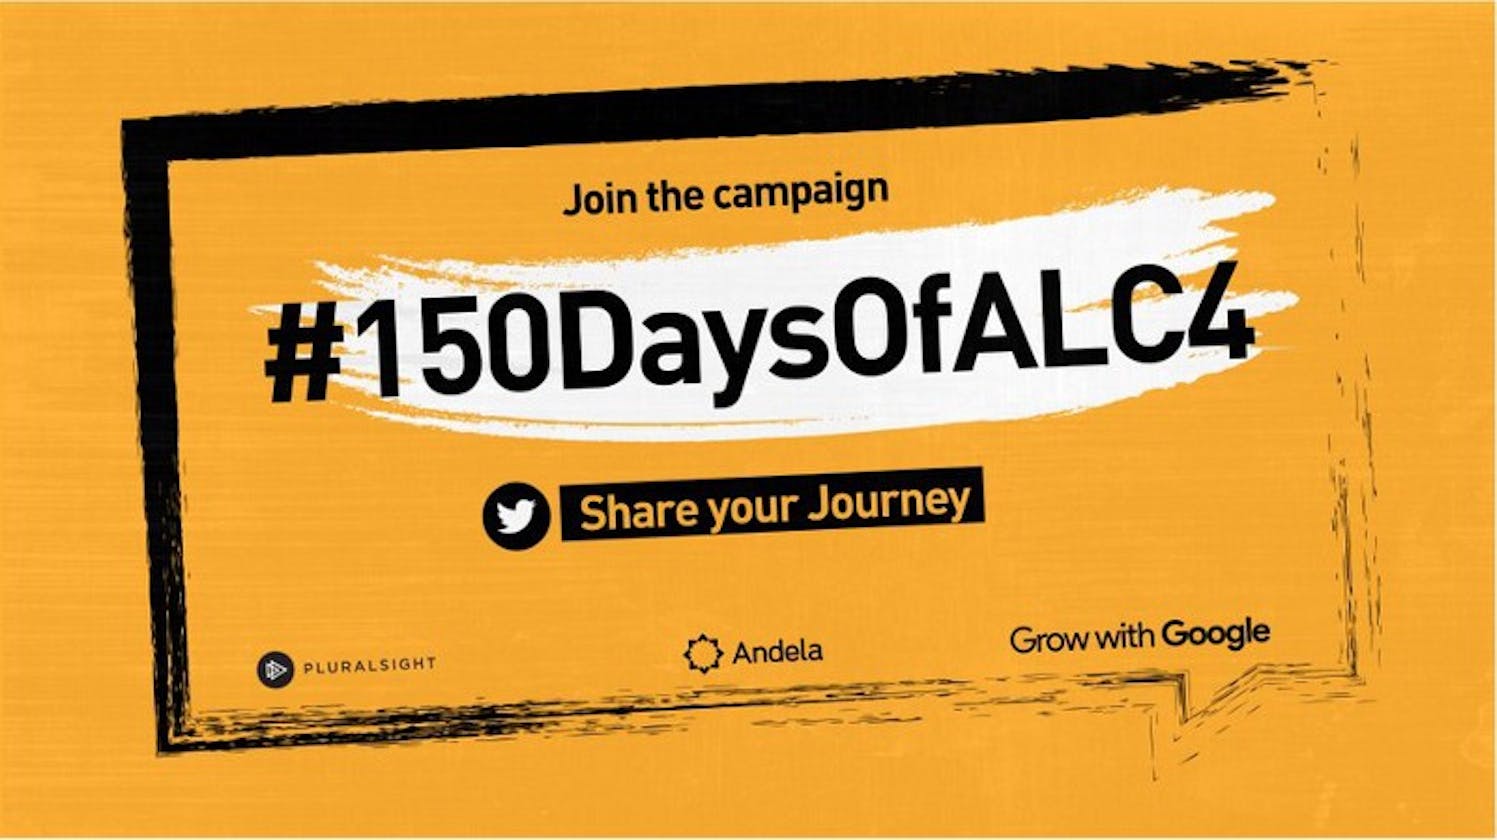 Keeping up with #150DaysOfALC4